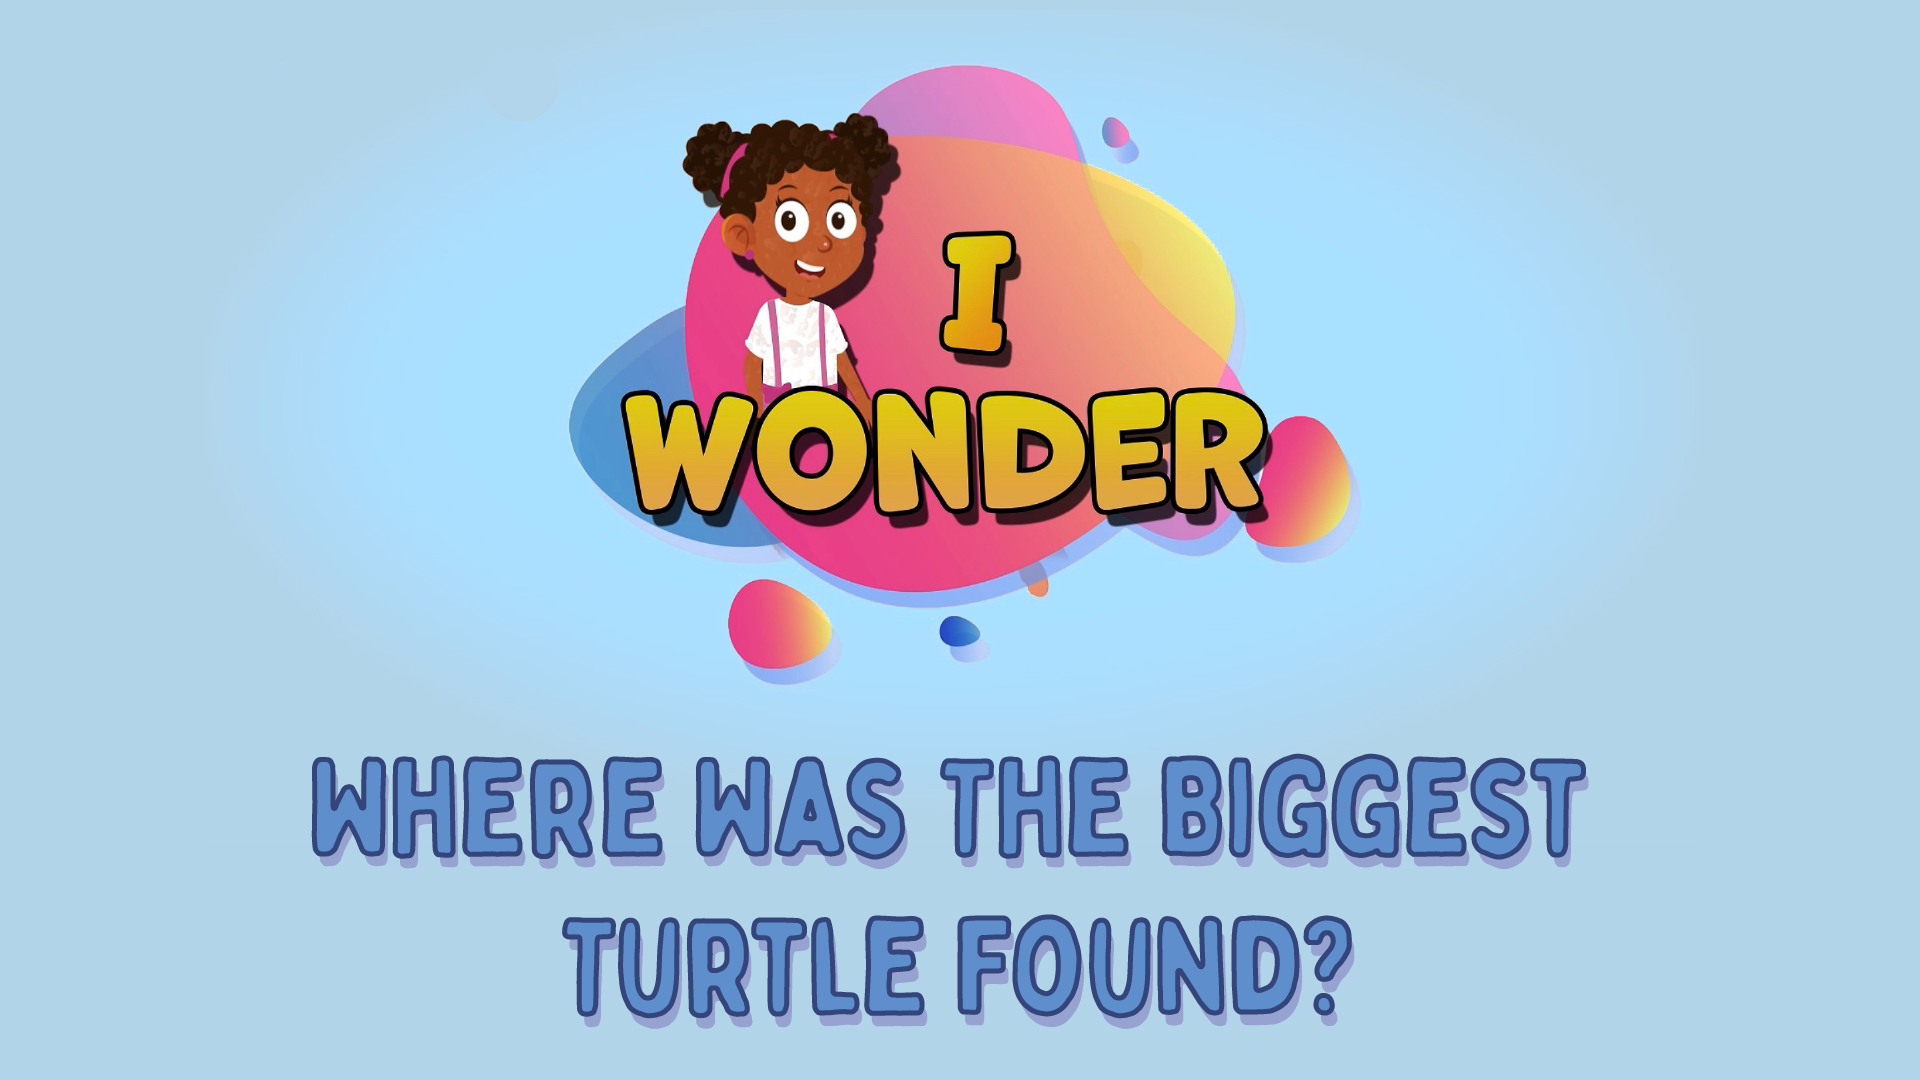 Where Was The Biggest Turtle Found?